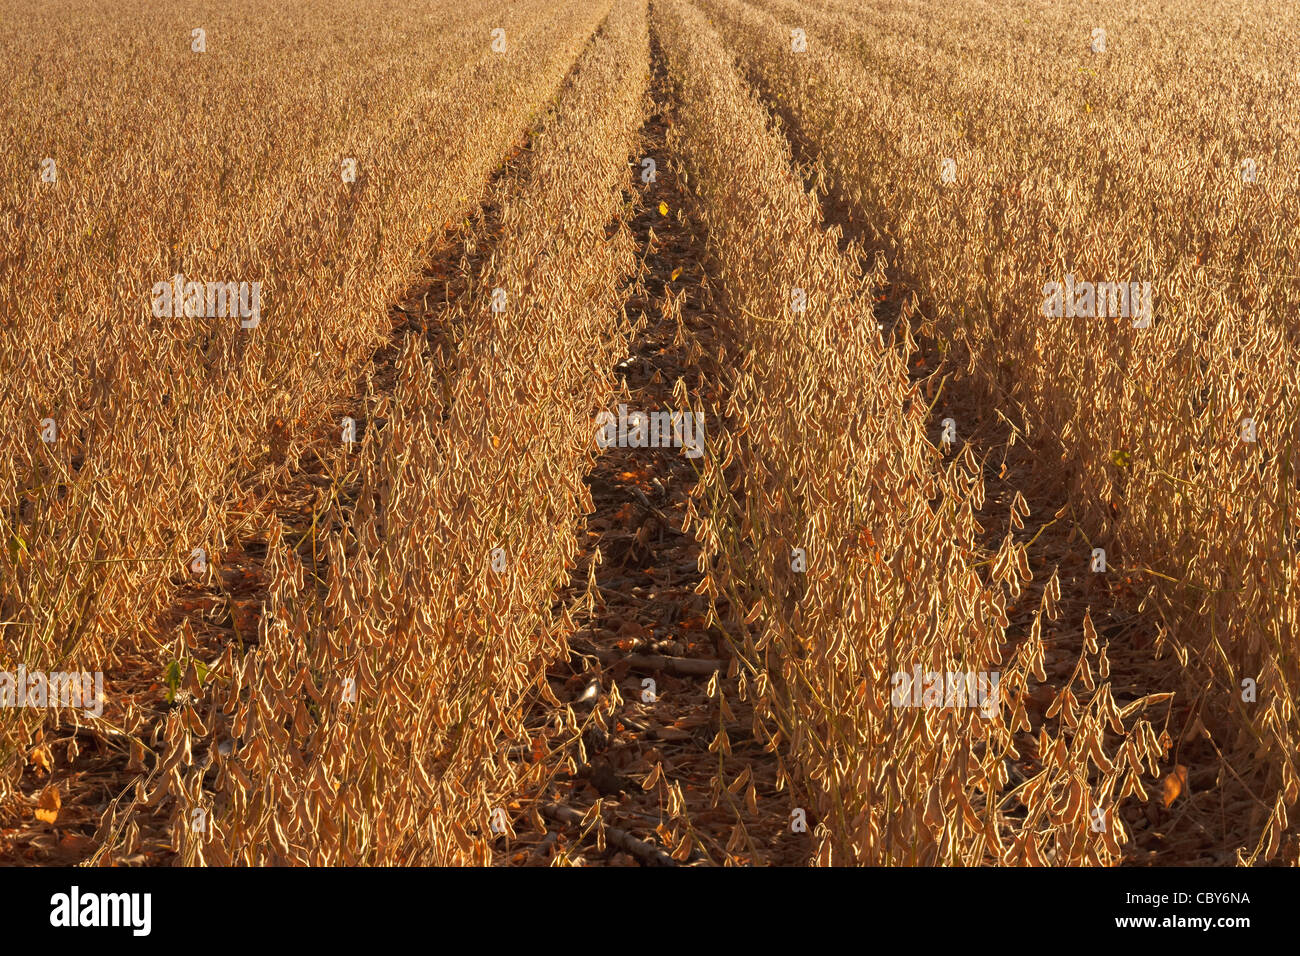 Soybean field ready to harvest Stock Photo